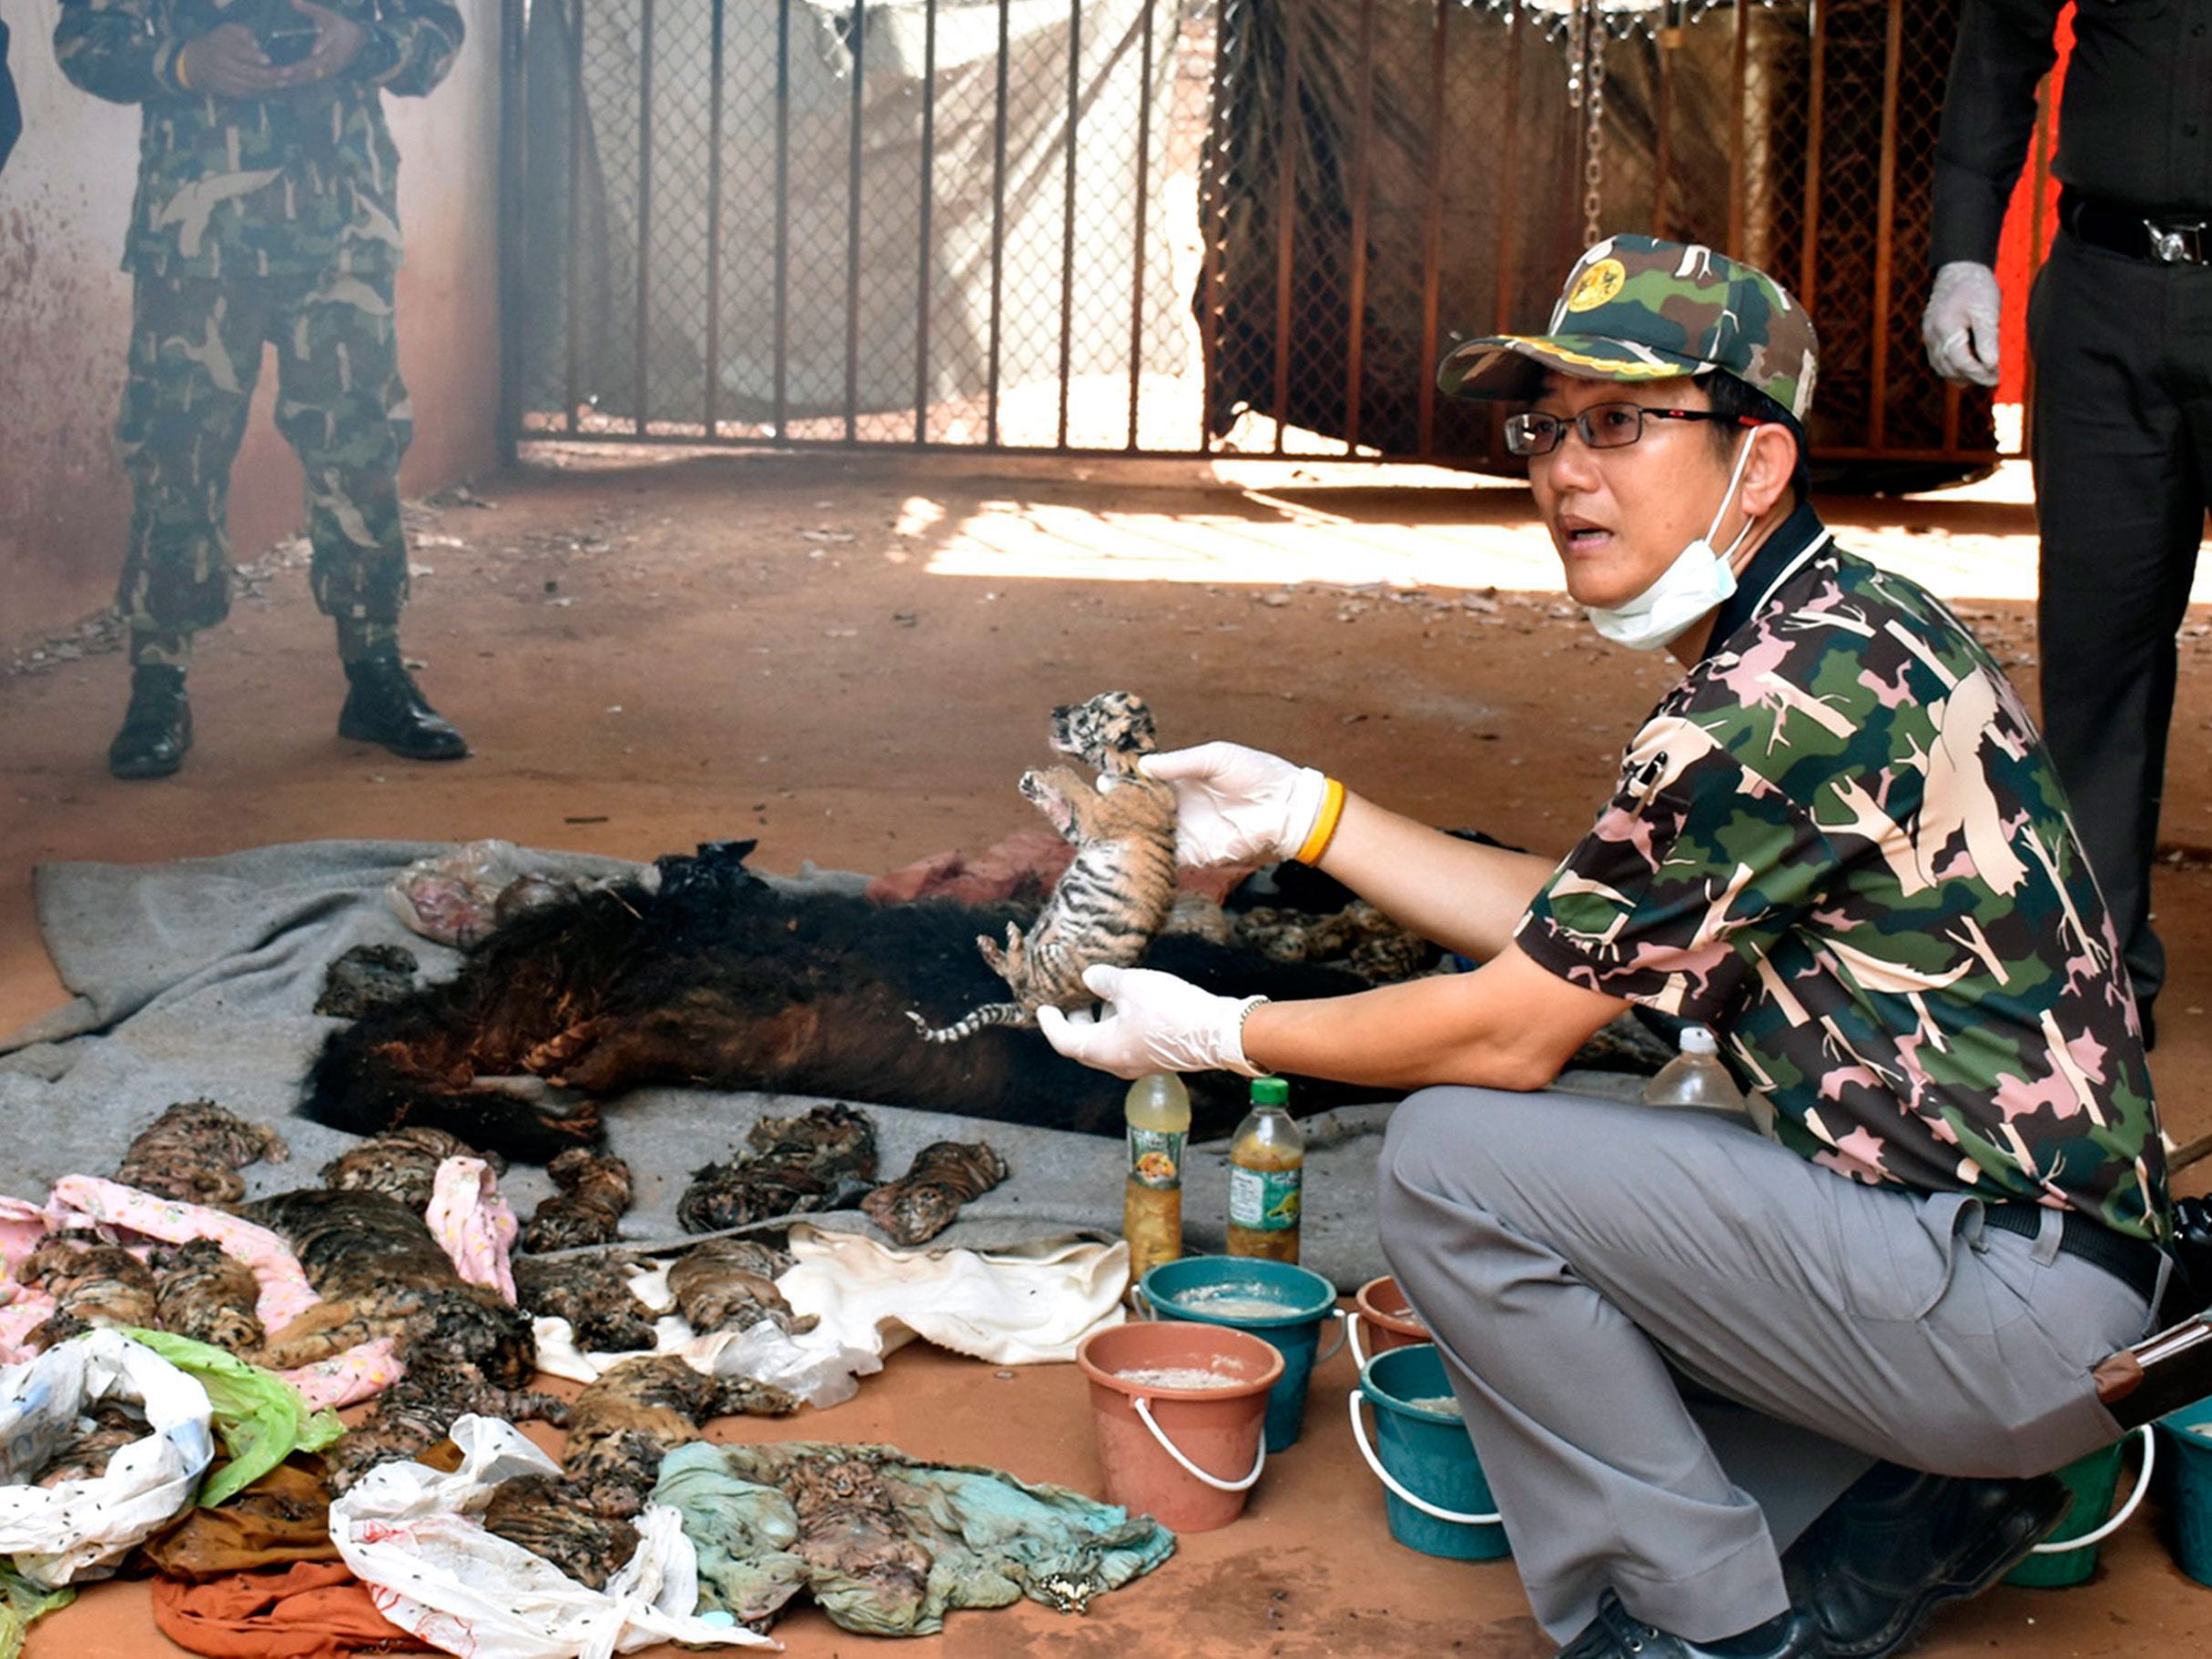 A Thai wildlife official displays carcasses of dead tiger cubs found during a raid at the Tiger Temple in Kanchanaburi Province, Thailand